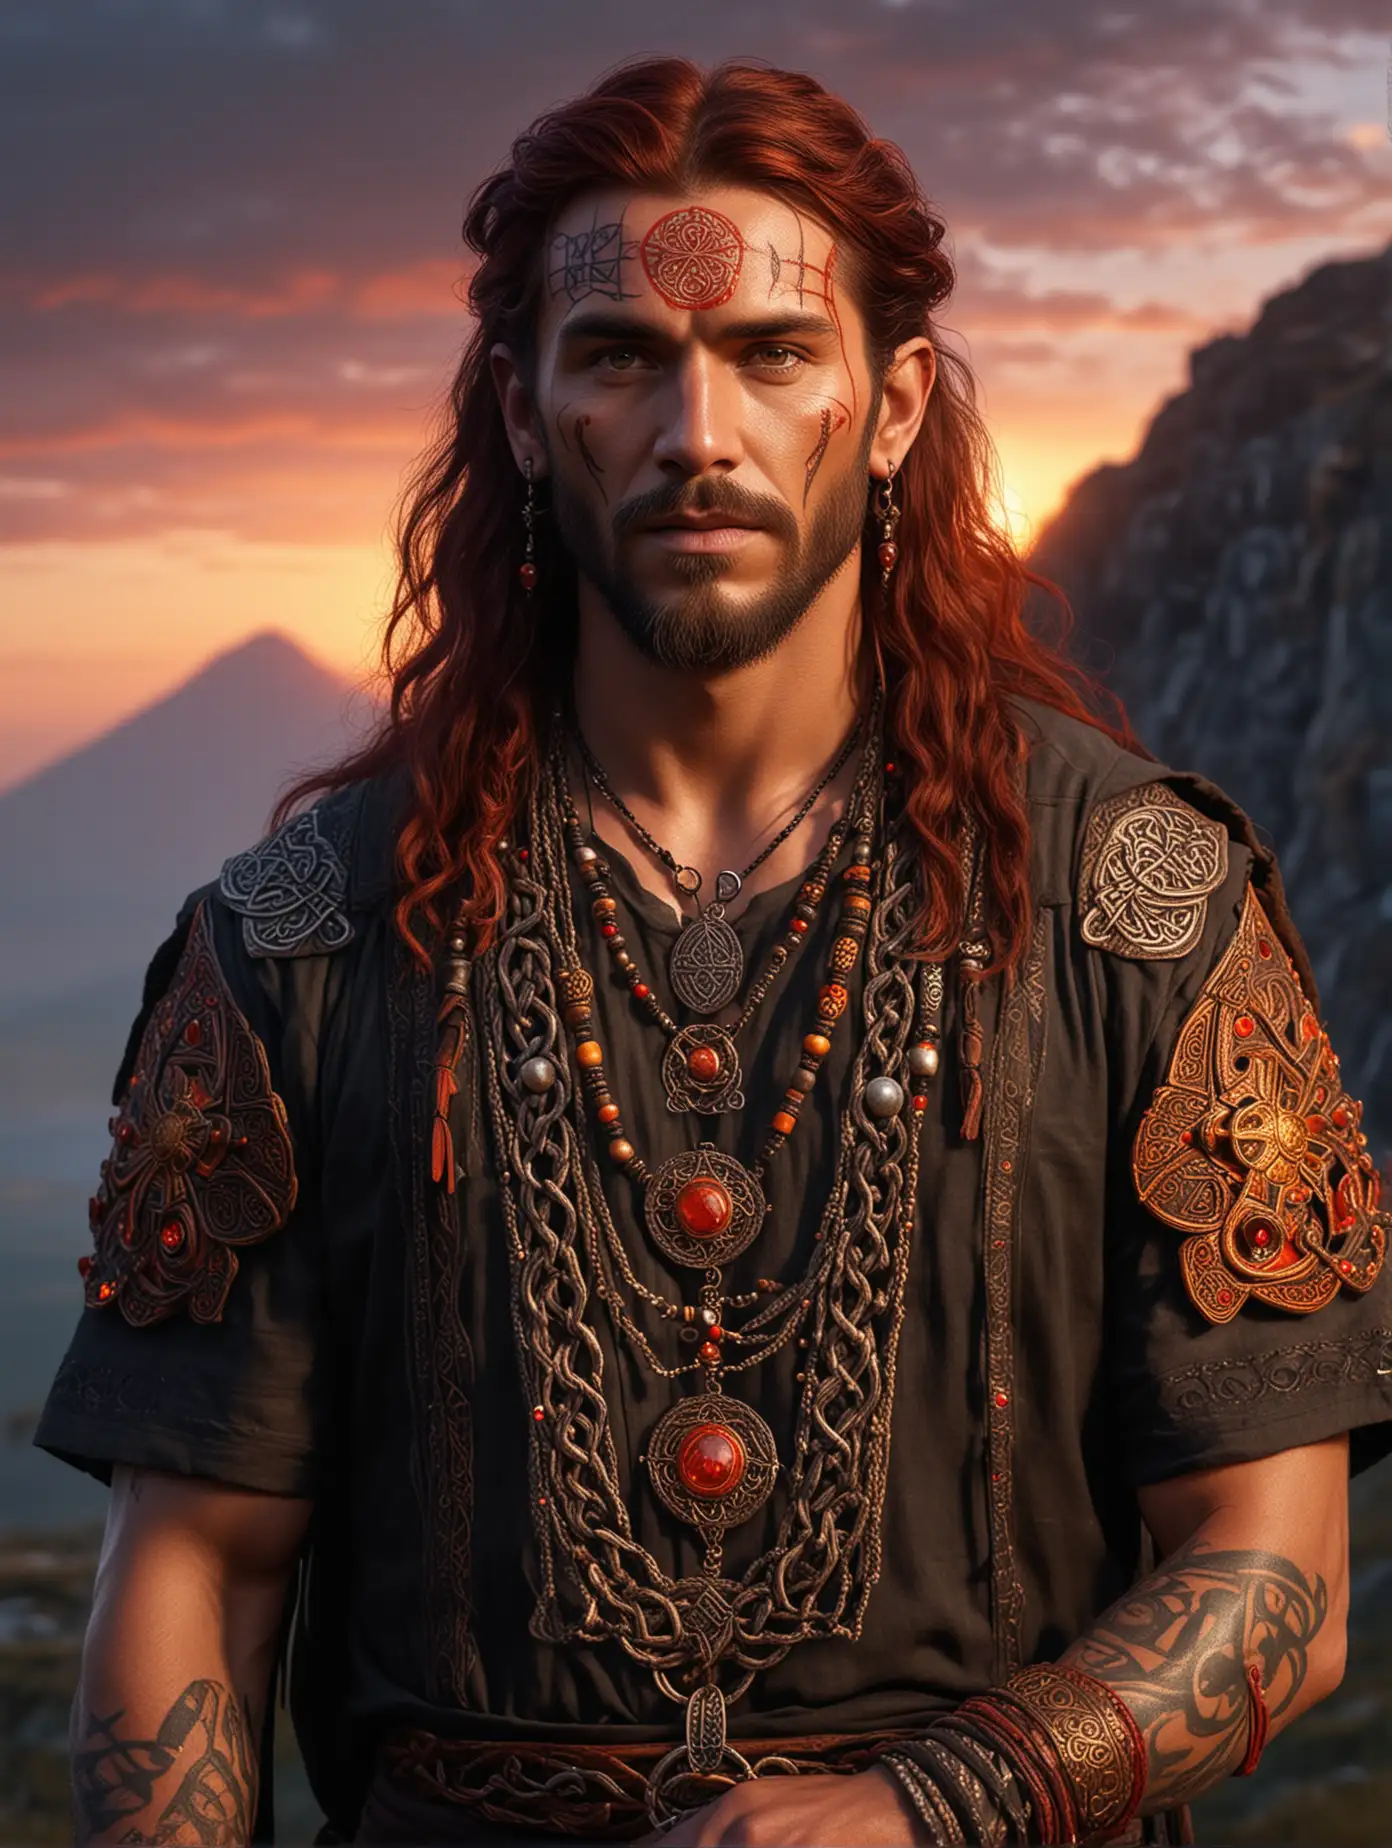 A nice celtic male shaman with red tattoos, a very dark reddish hair wearing a dark tunic, adorned with red and orange gems, many golden mystical signs : 1.
| Volcano in the back and sparckles : 1.
| lanterns : .9
| Very detailed, sunset, nordic atmosphere : 1.
| Highly detailed,high precision,focus on textures, hyperrealistic : 1.